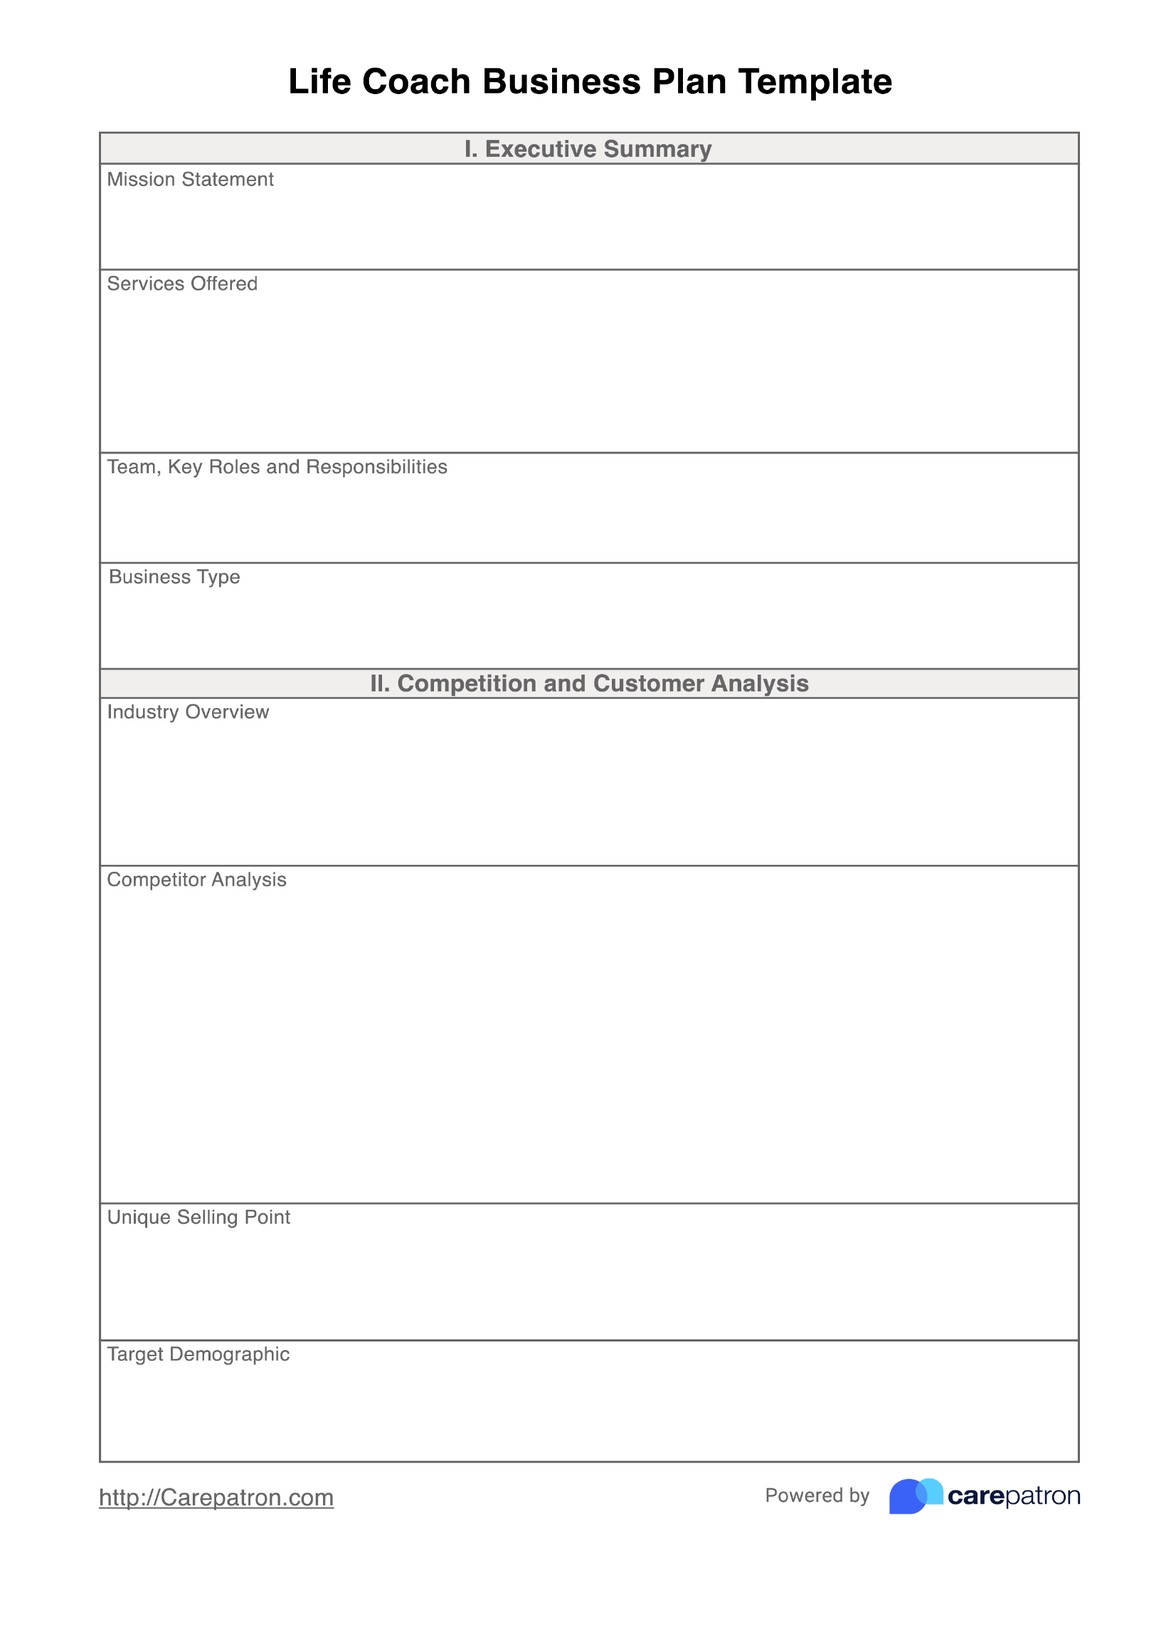 Life Coach Business Plan Template PDF Example